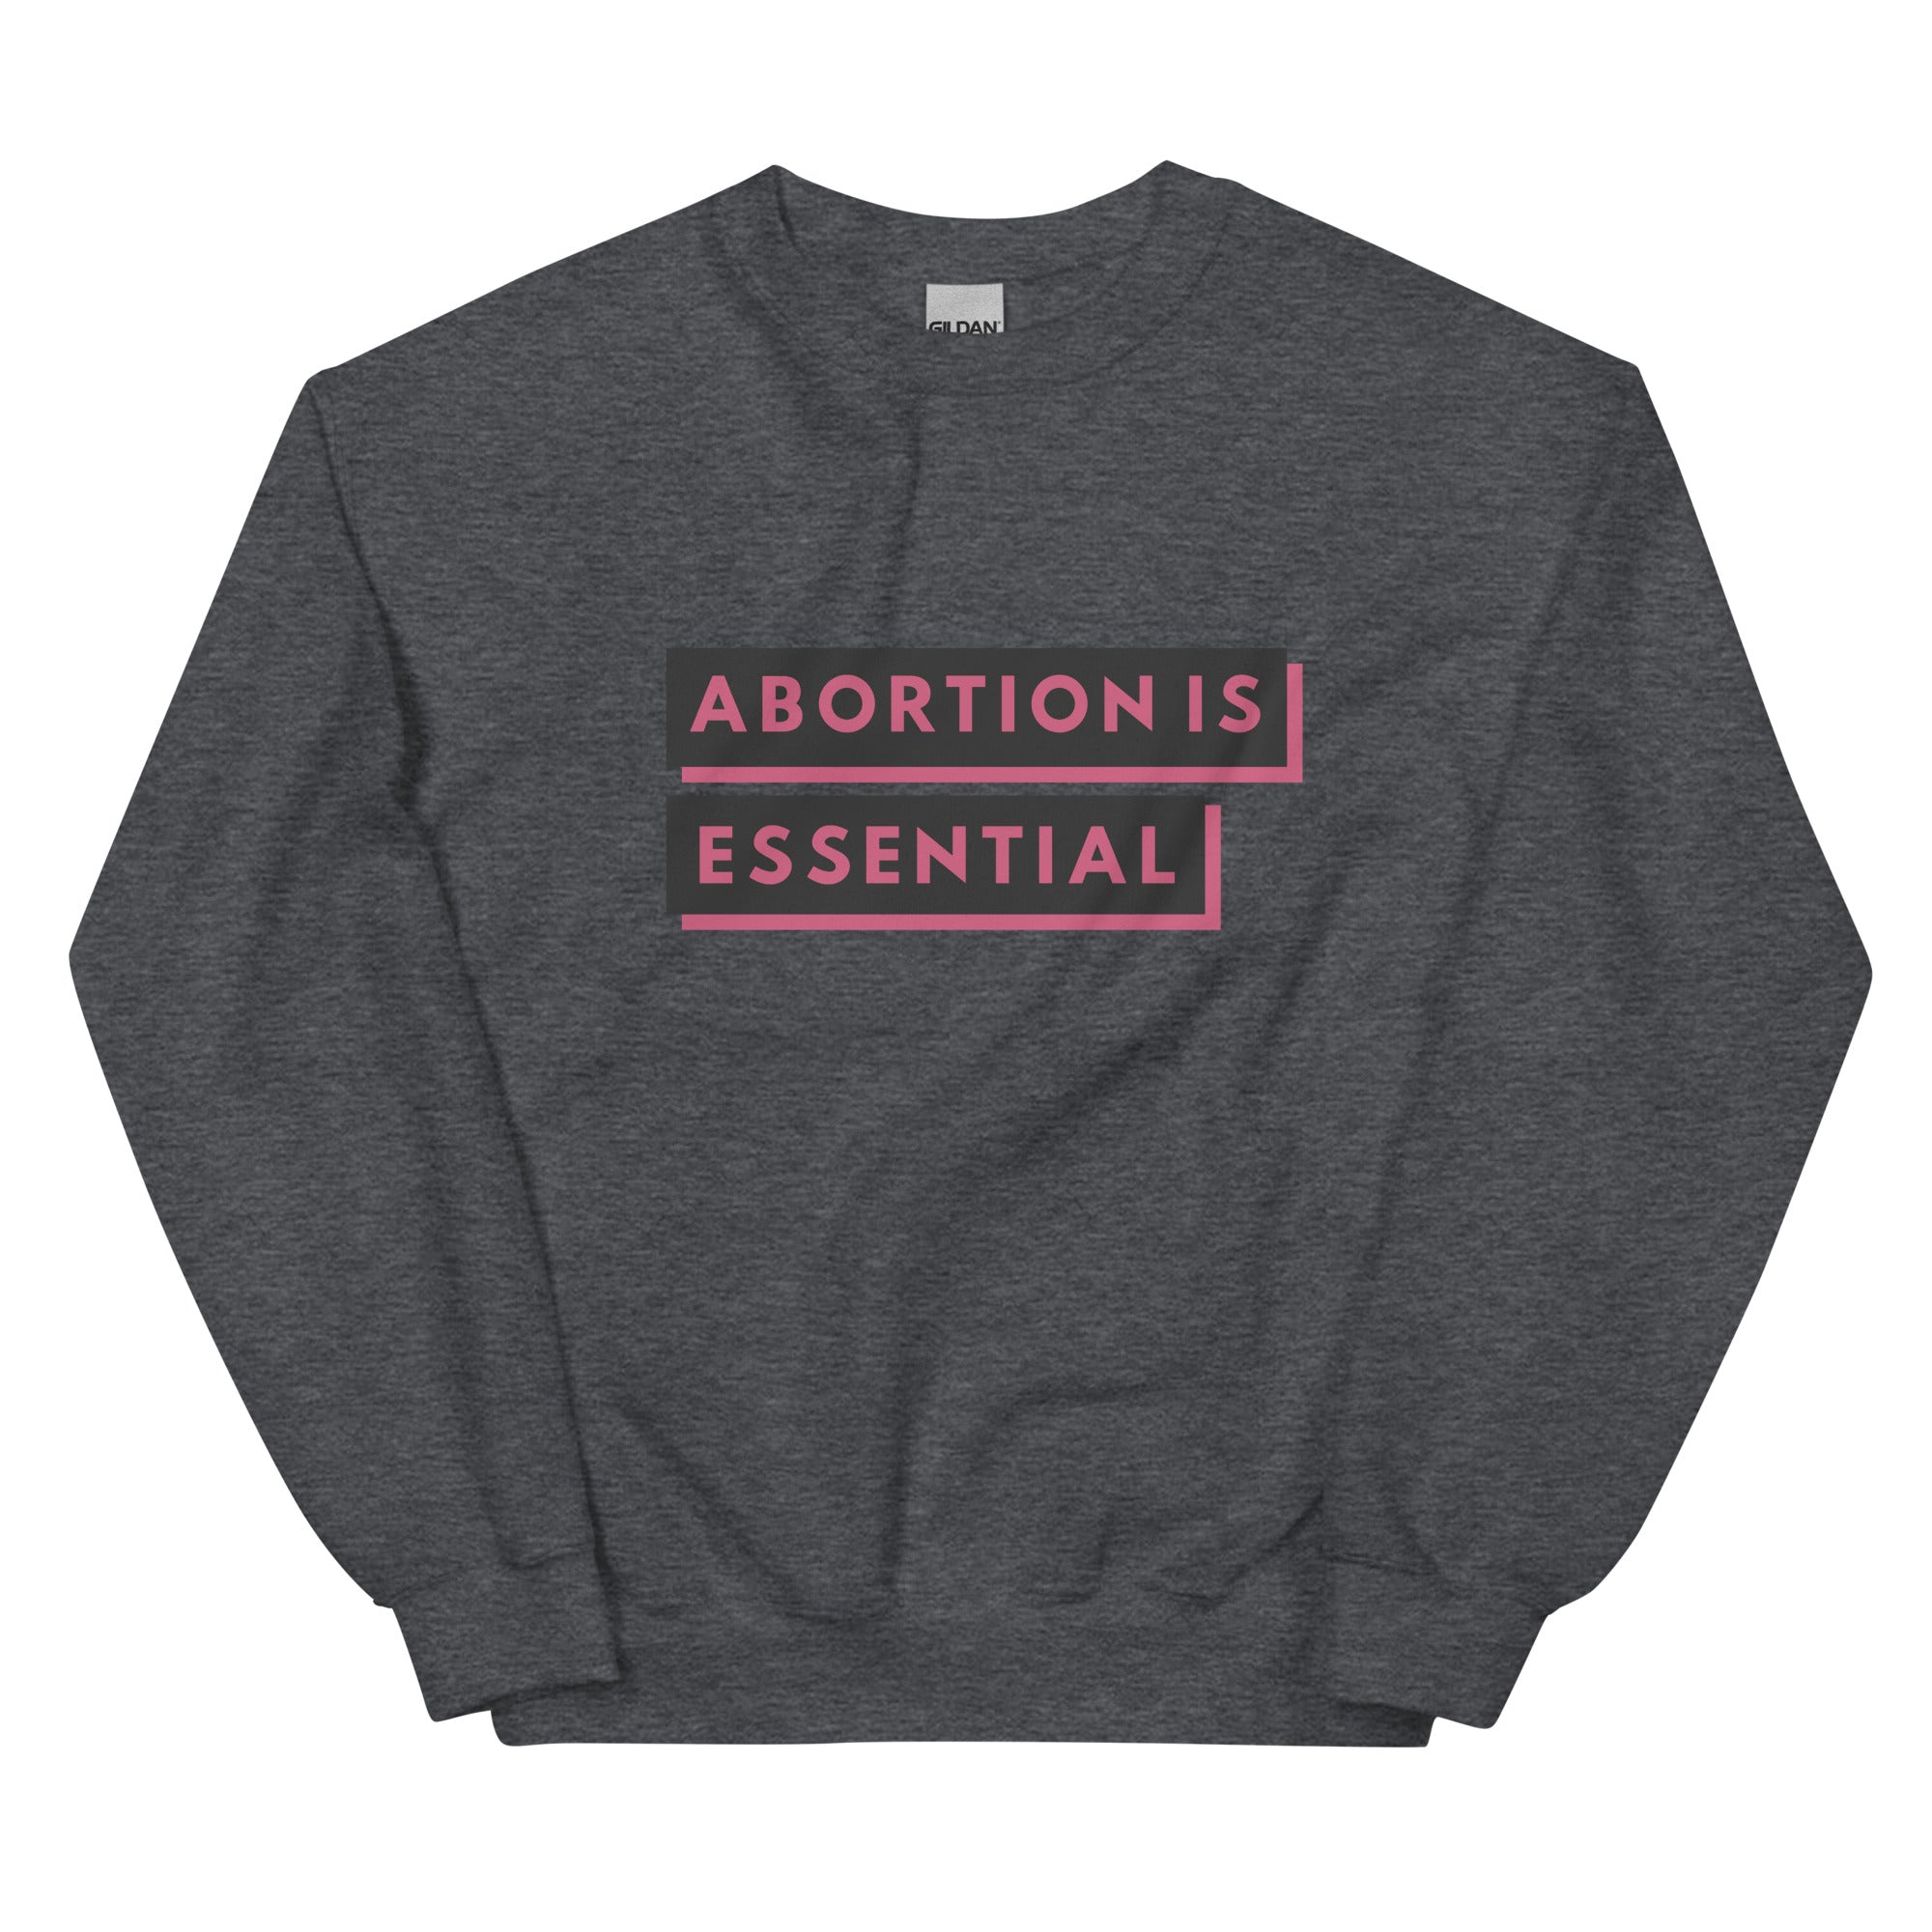 Abortion is essential sweater